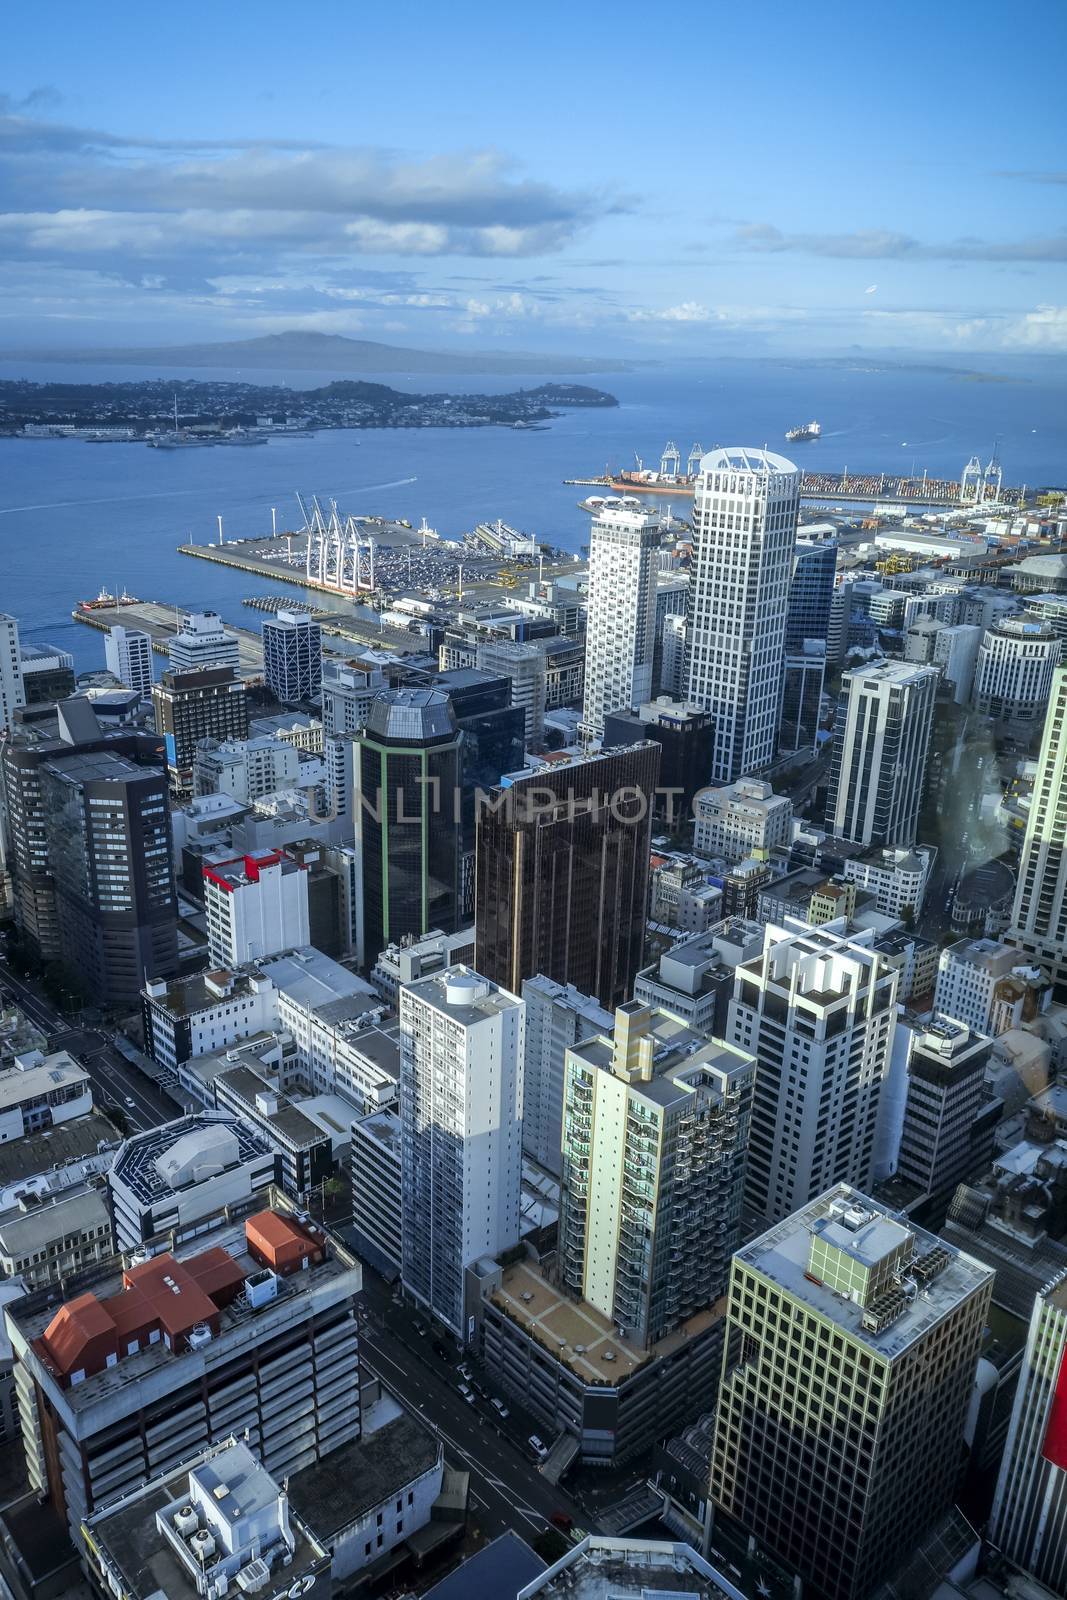 Auckland aerial view, New Zealand by daboost